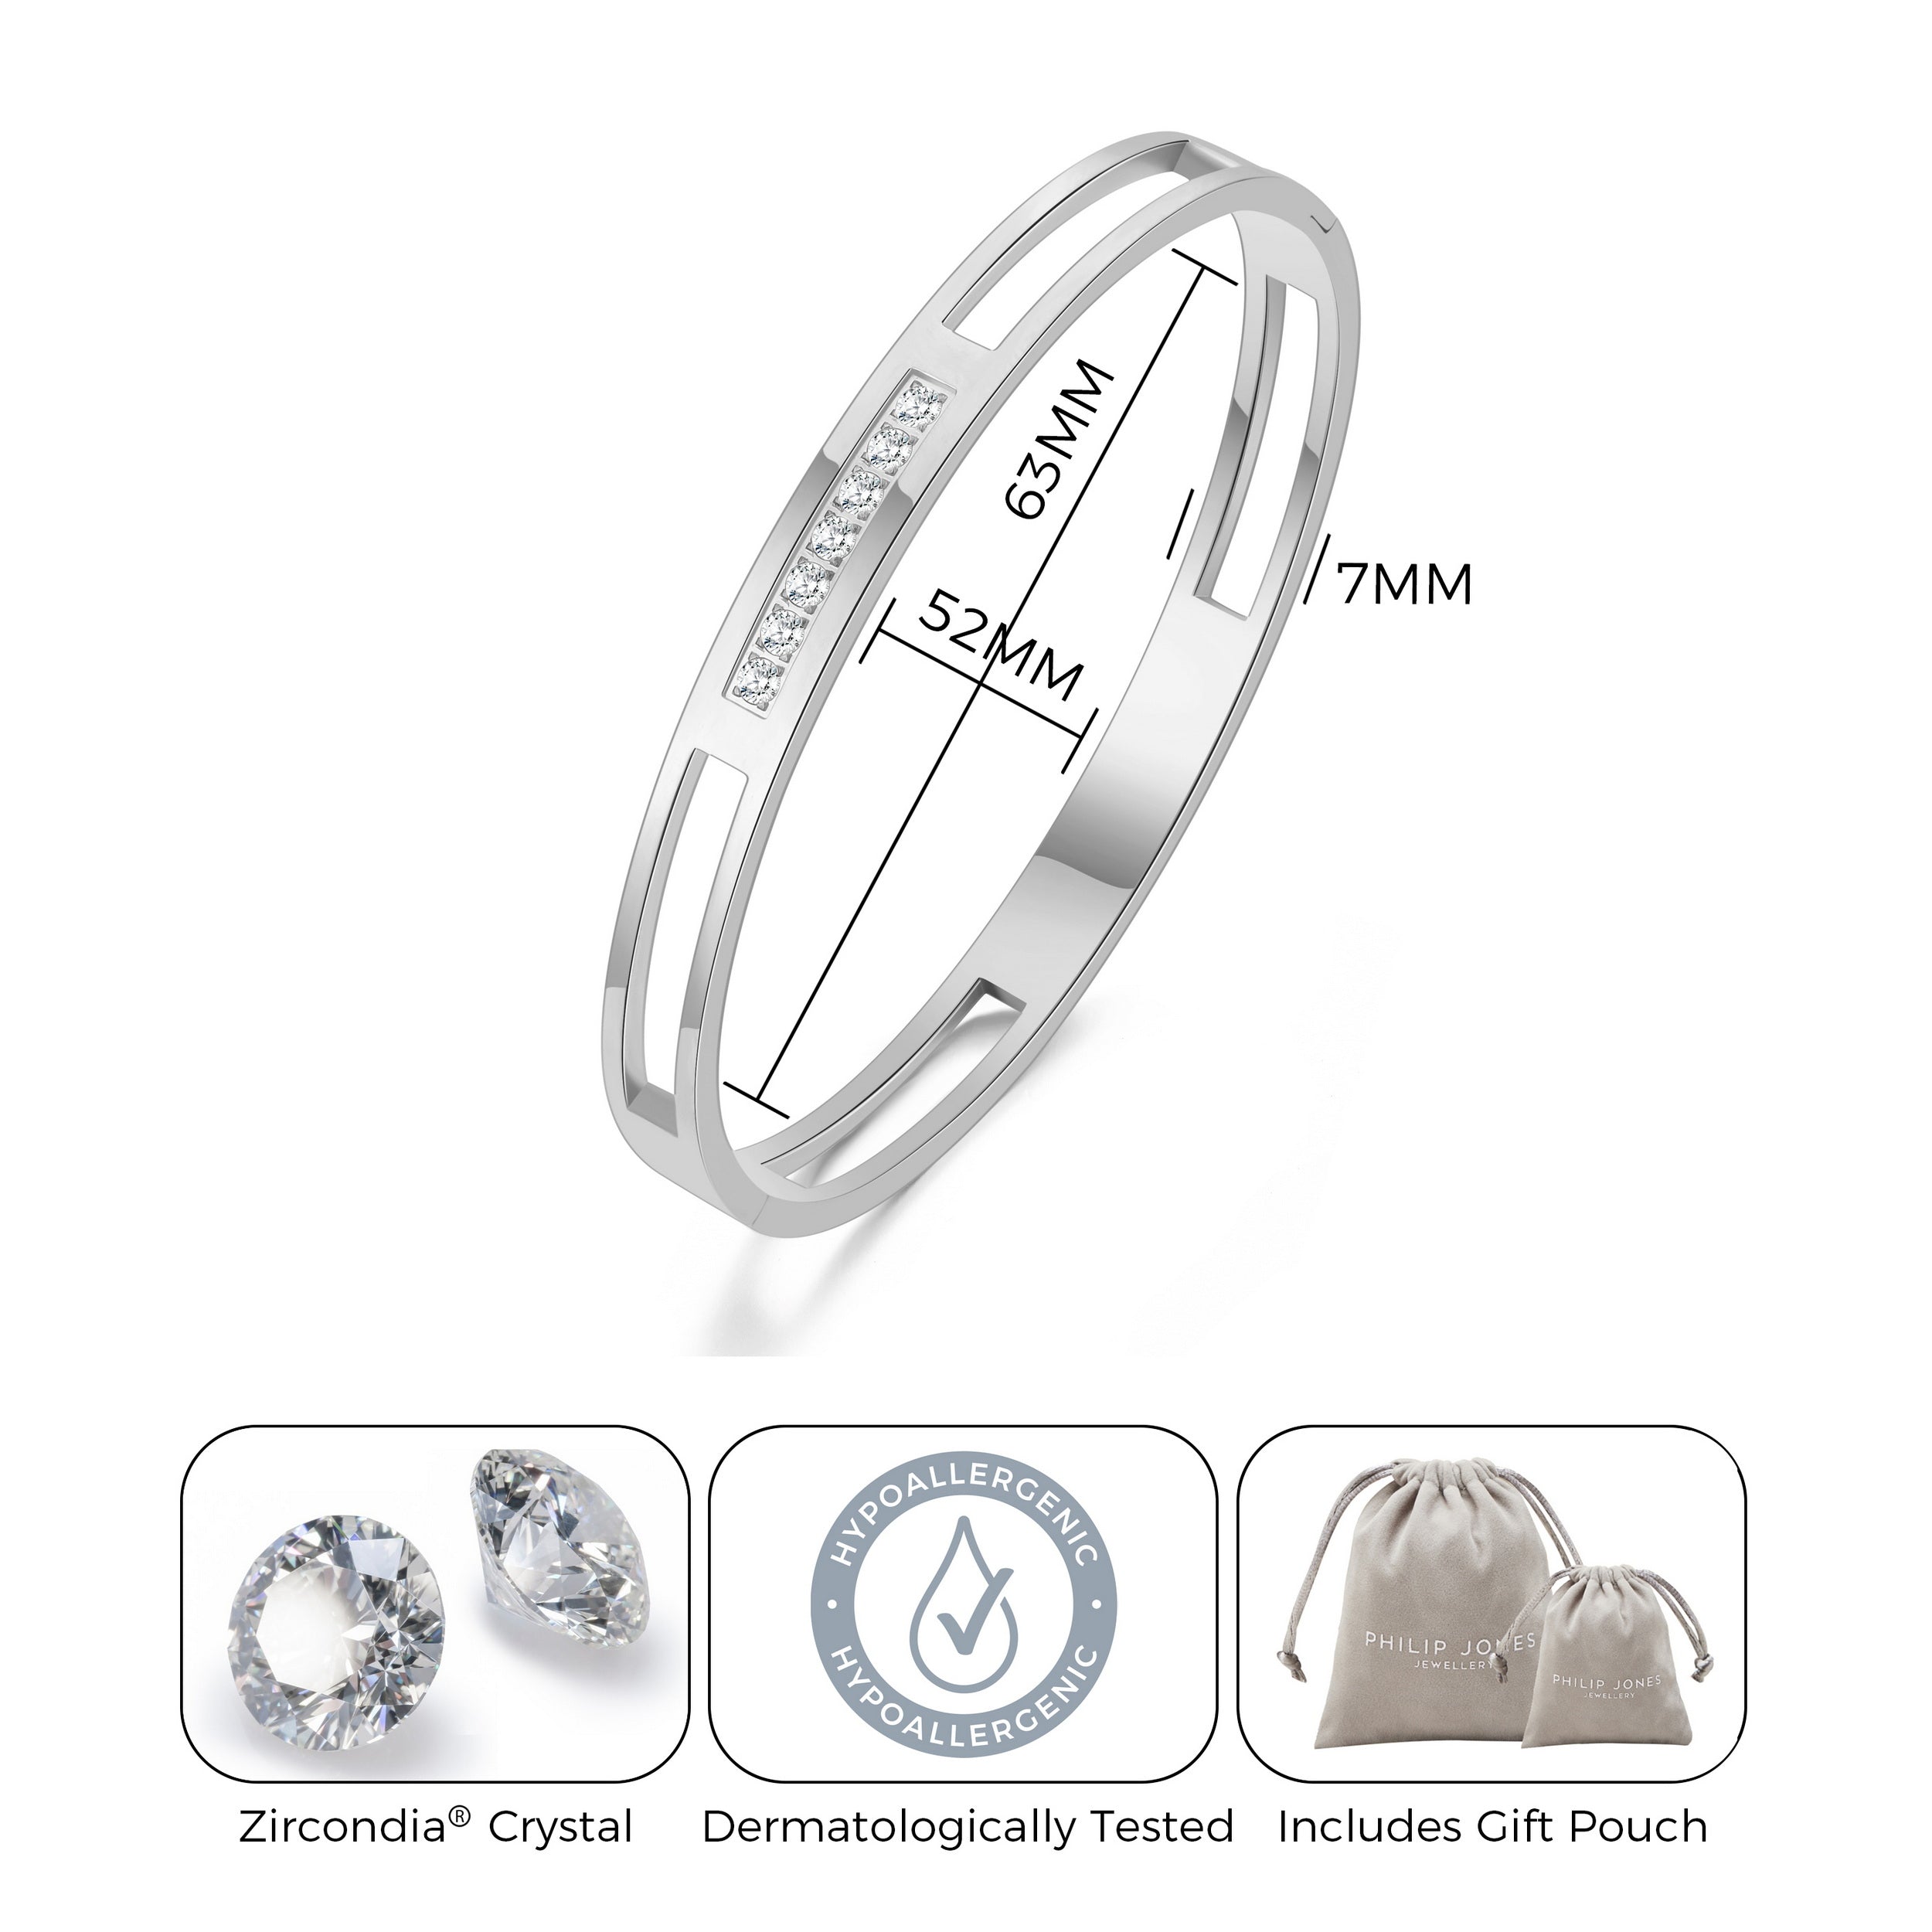 Stainless Steel Channel Bangle Created with Zircondia® Crystals